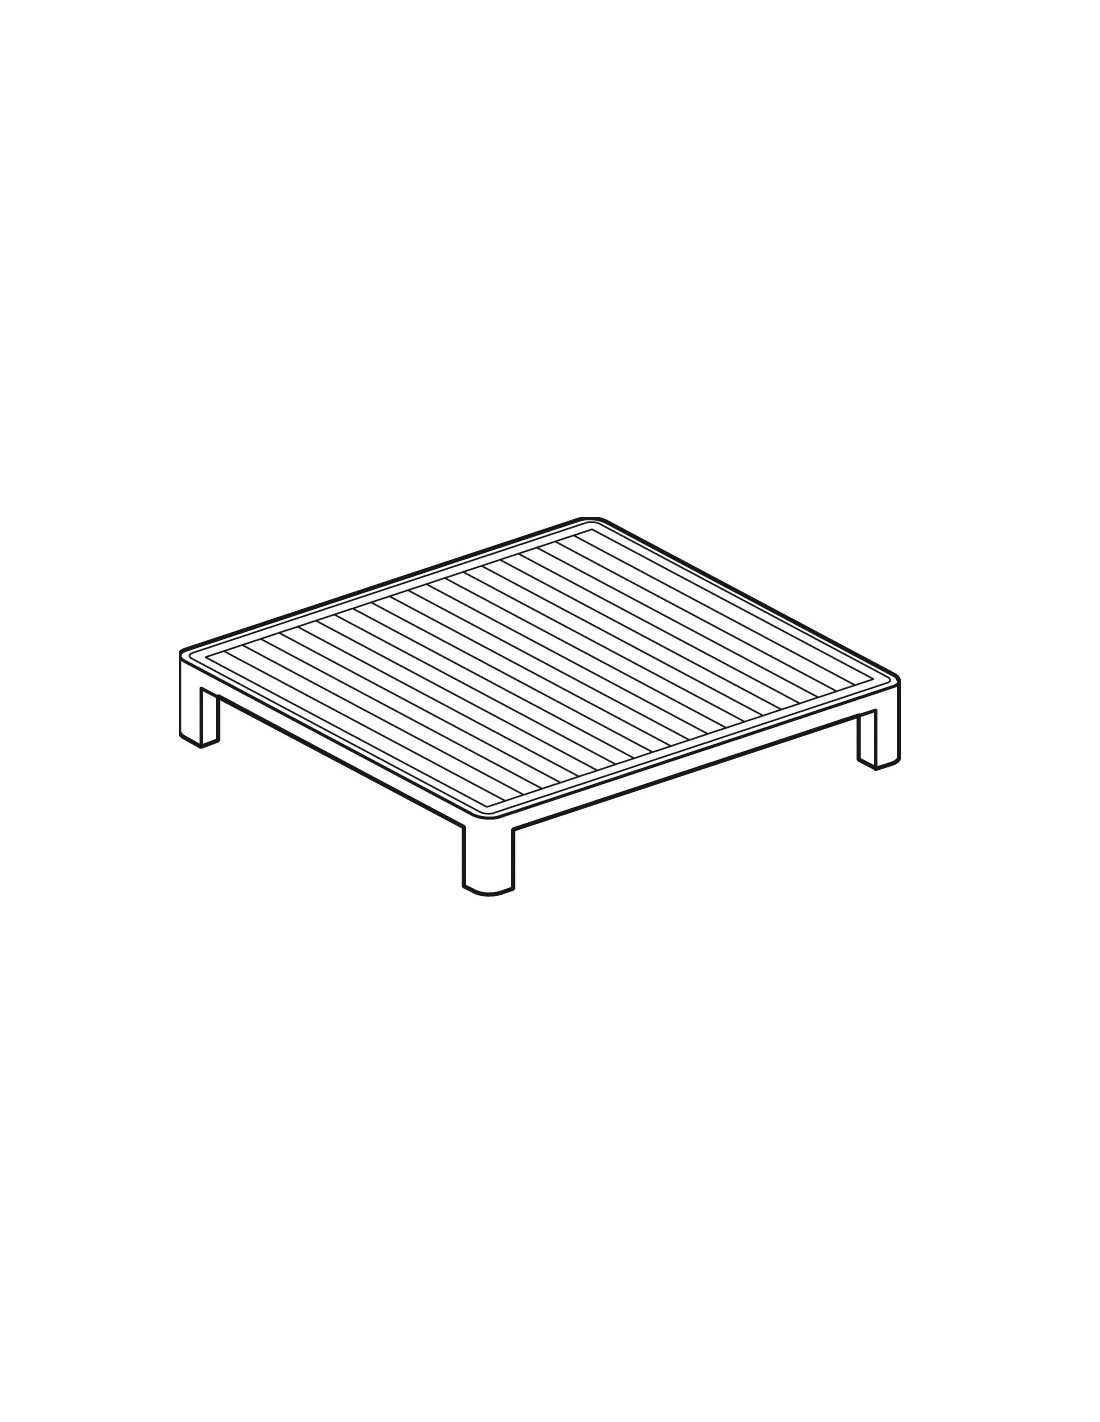 Grooved plate for big stove - Dimensions 35 x 37 cm